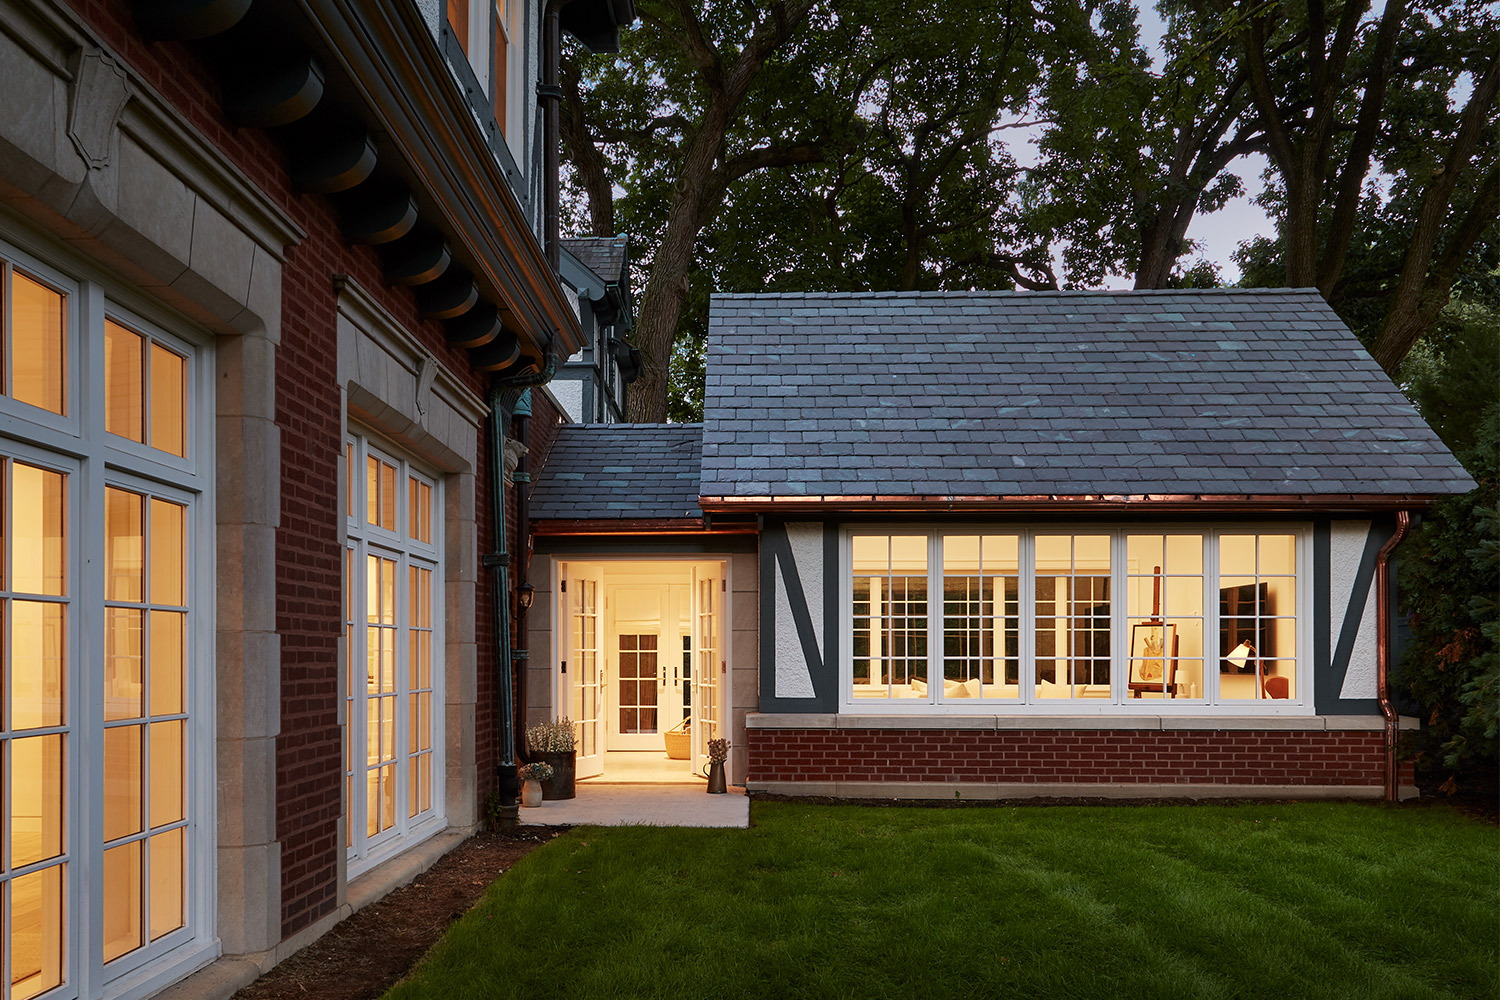 Luxury Residential Construction - Evanston Weibolt Carriage House exterior at dusk